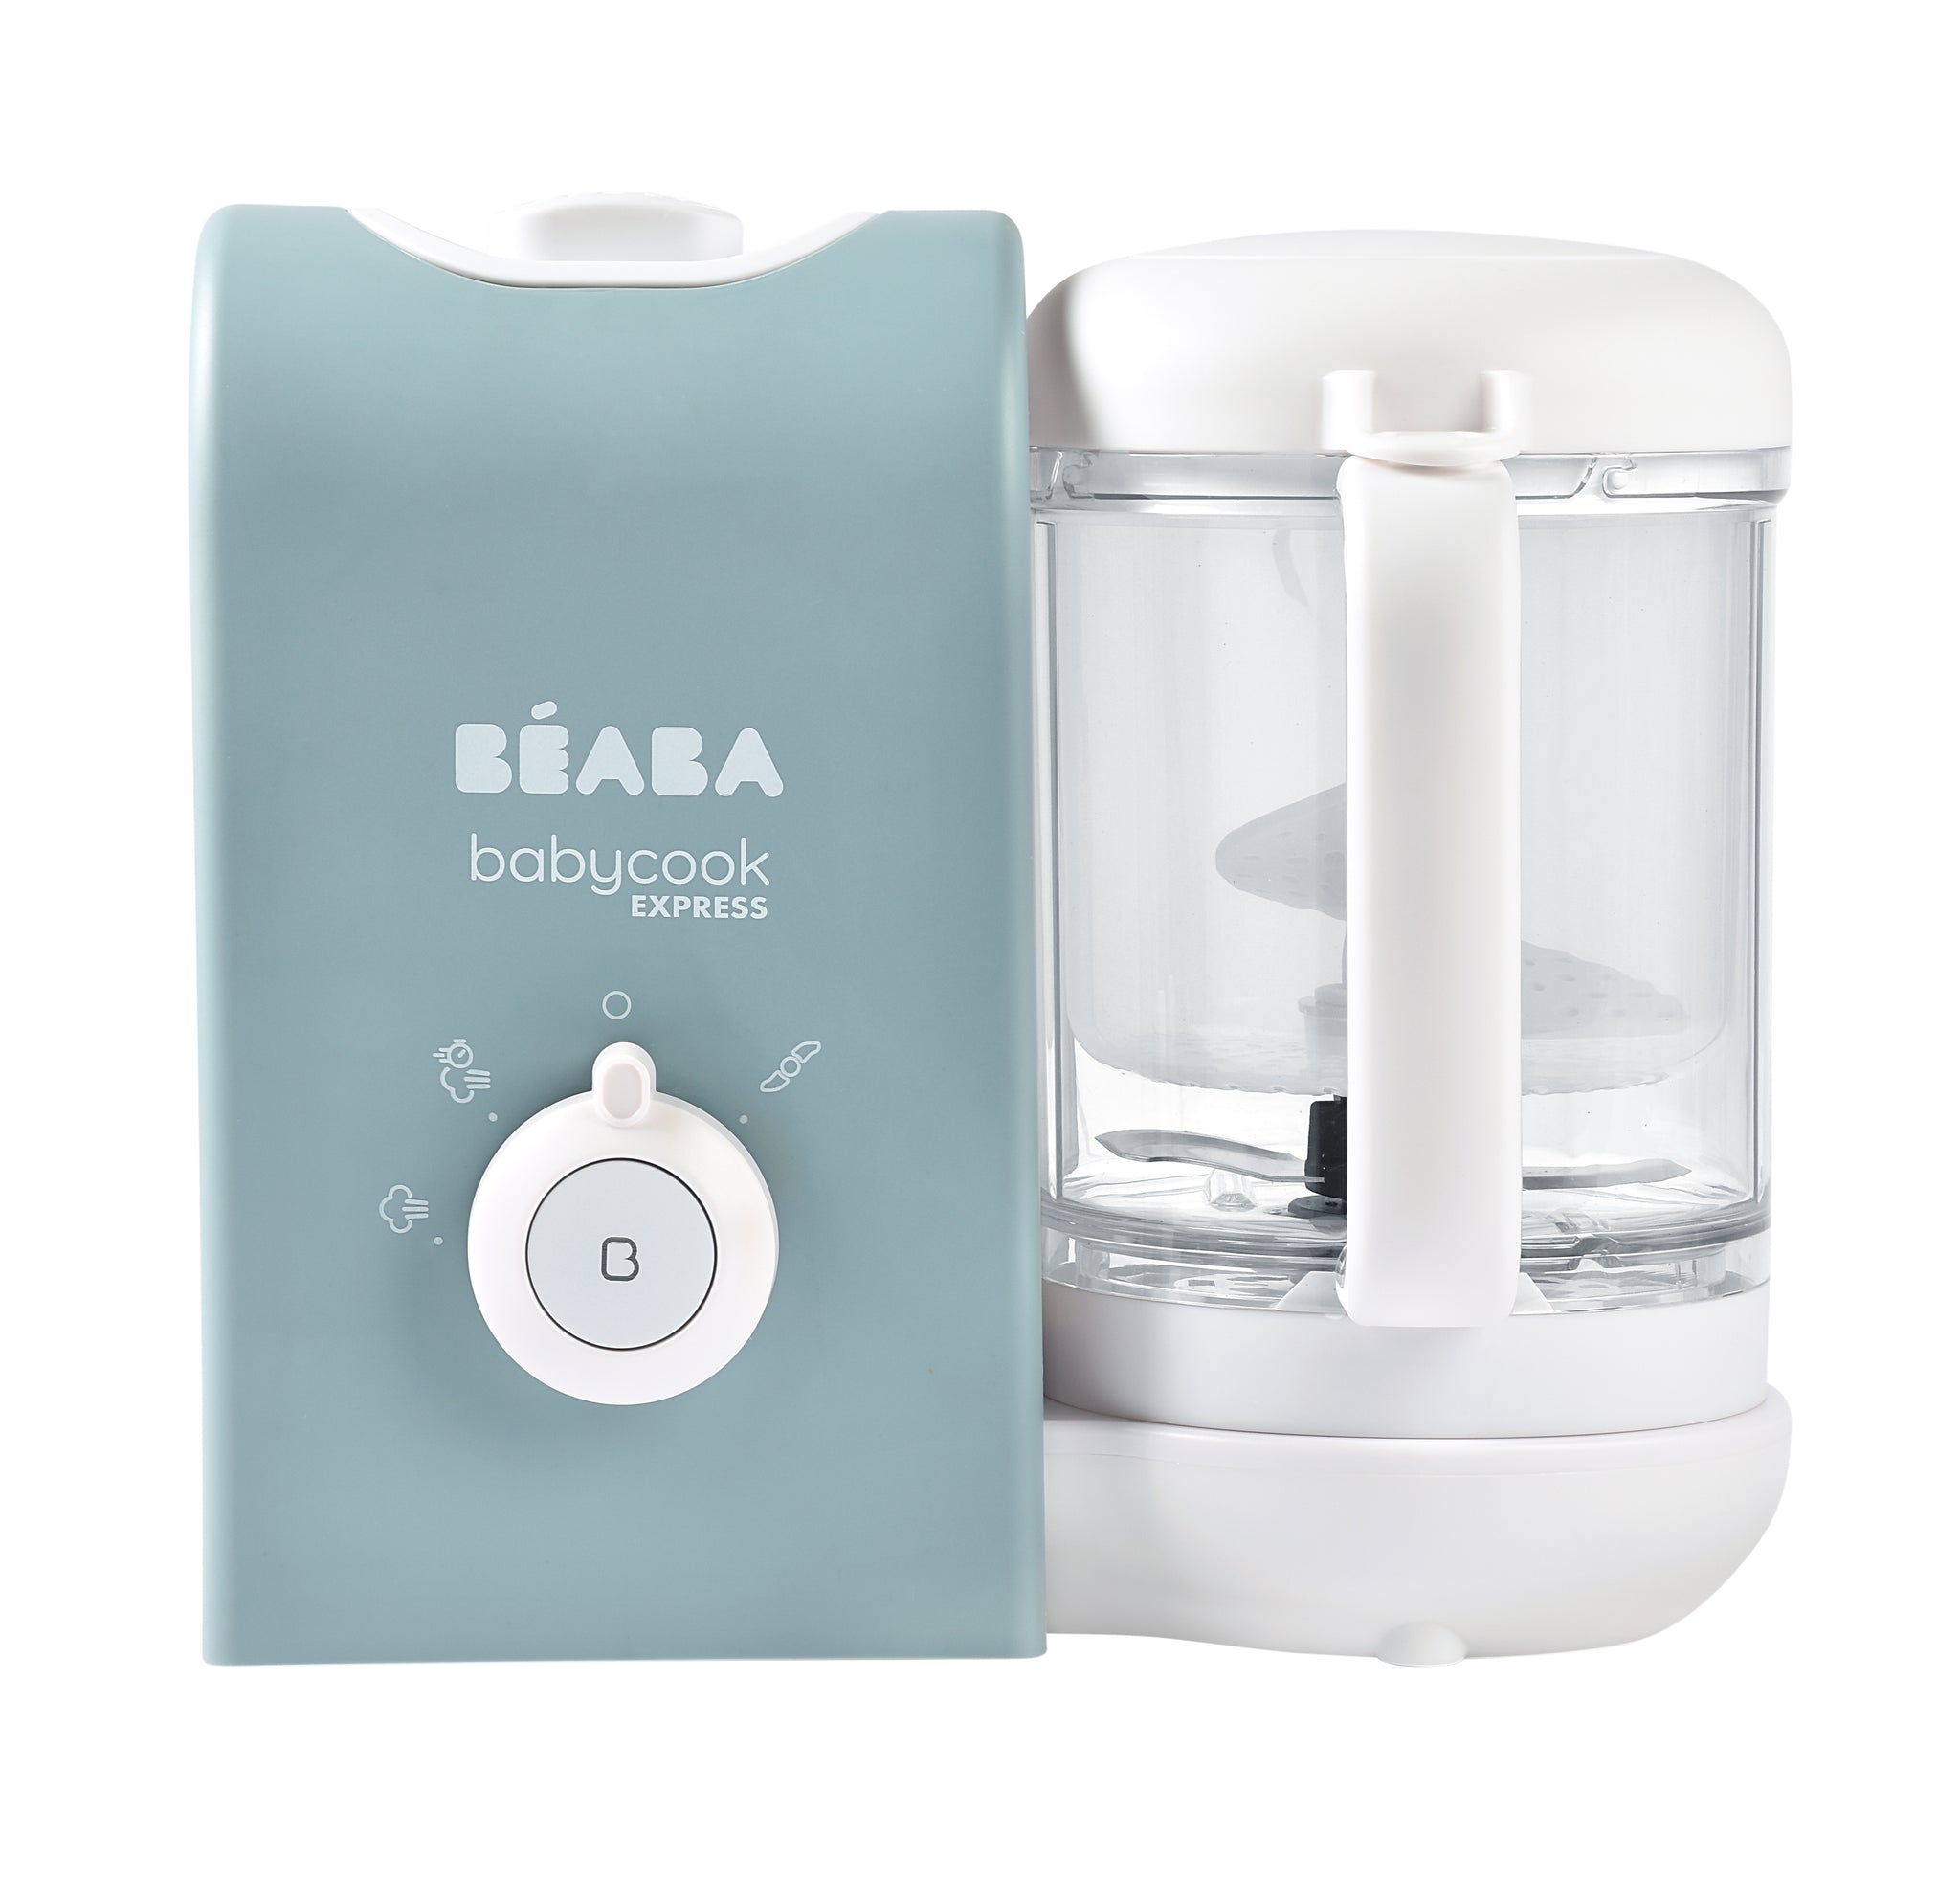 BEABA - Instructions for use : Babycook® Neo, how to reheat or